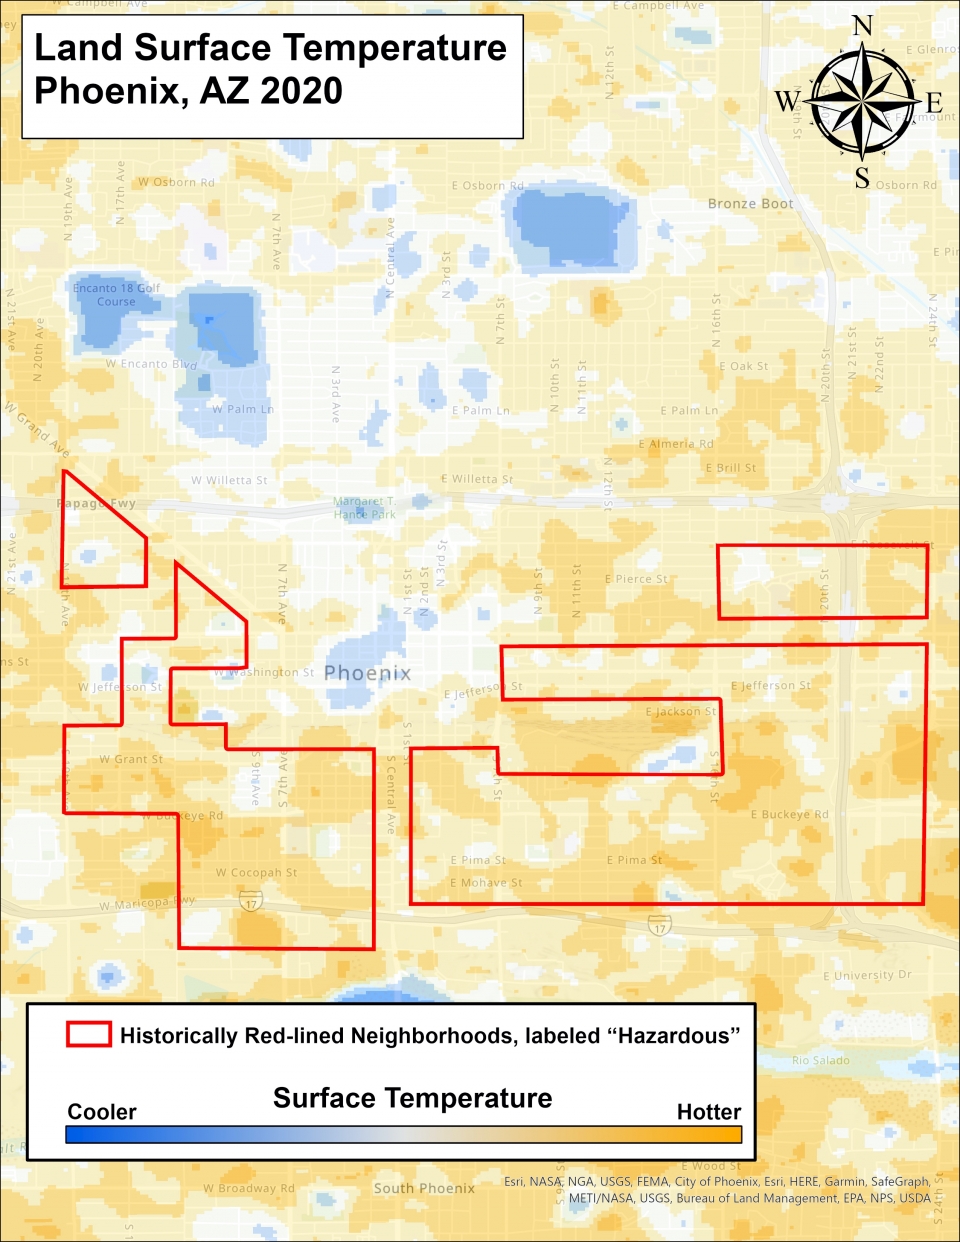 Map of land surface temperatures and redlining in Phoenix